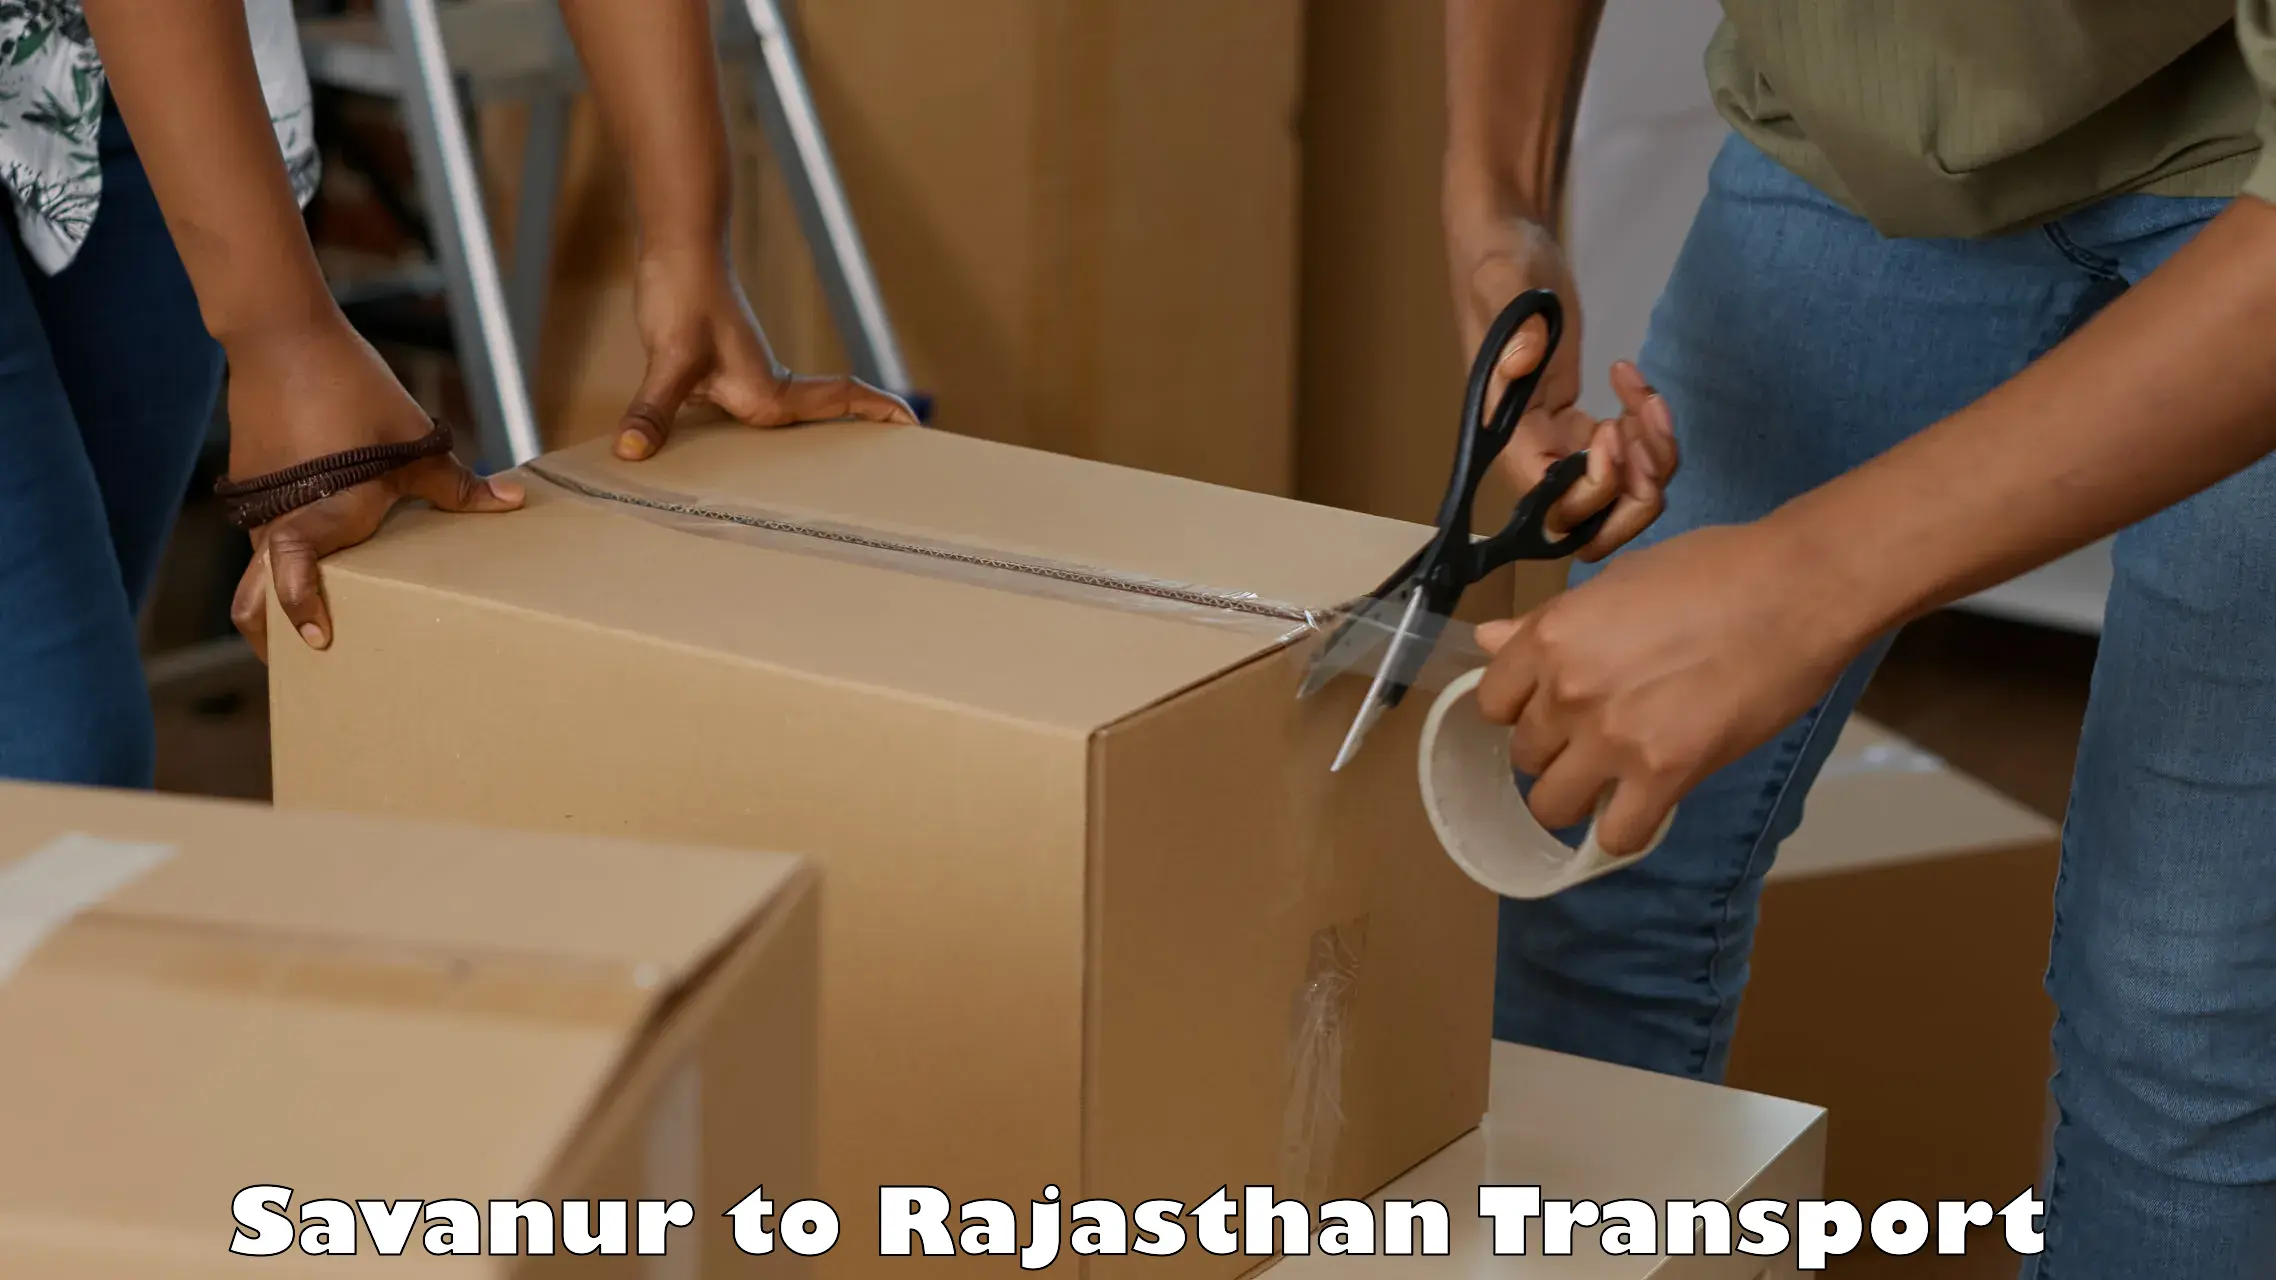 Truck transport companies in India Savanur to Piparcity